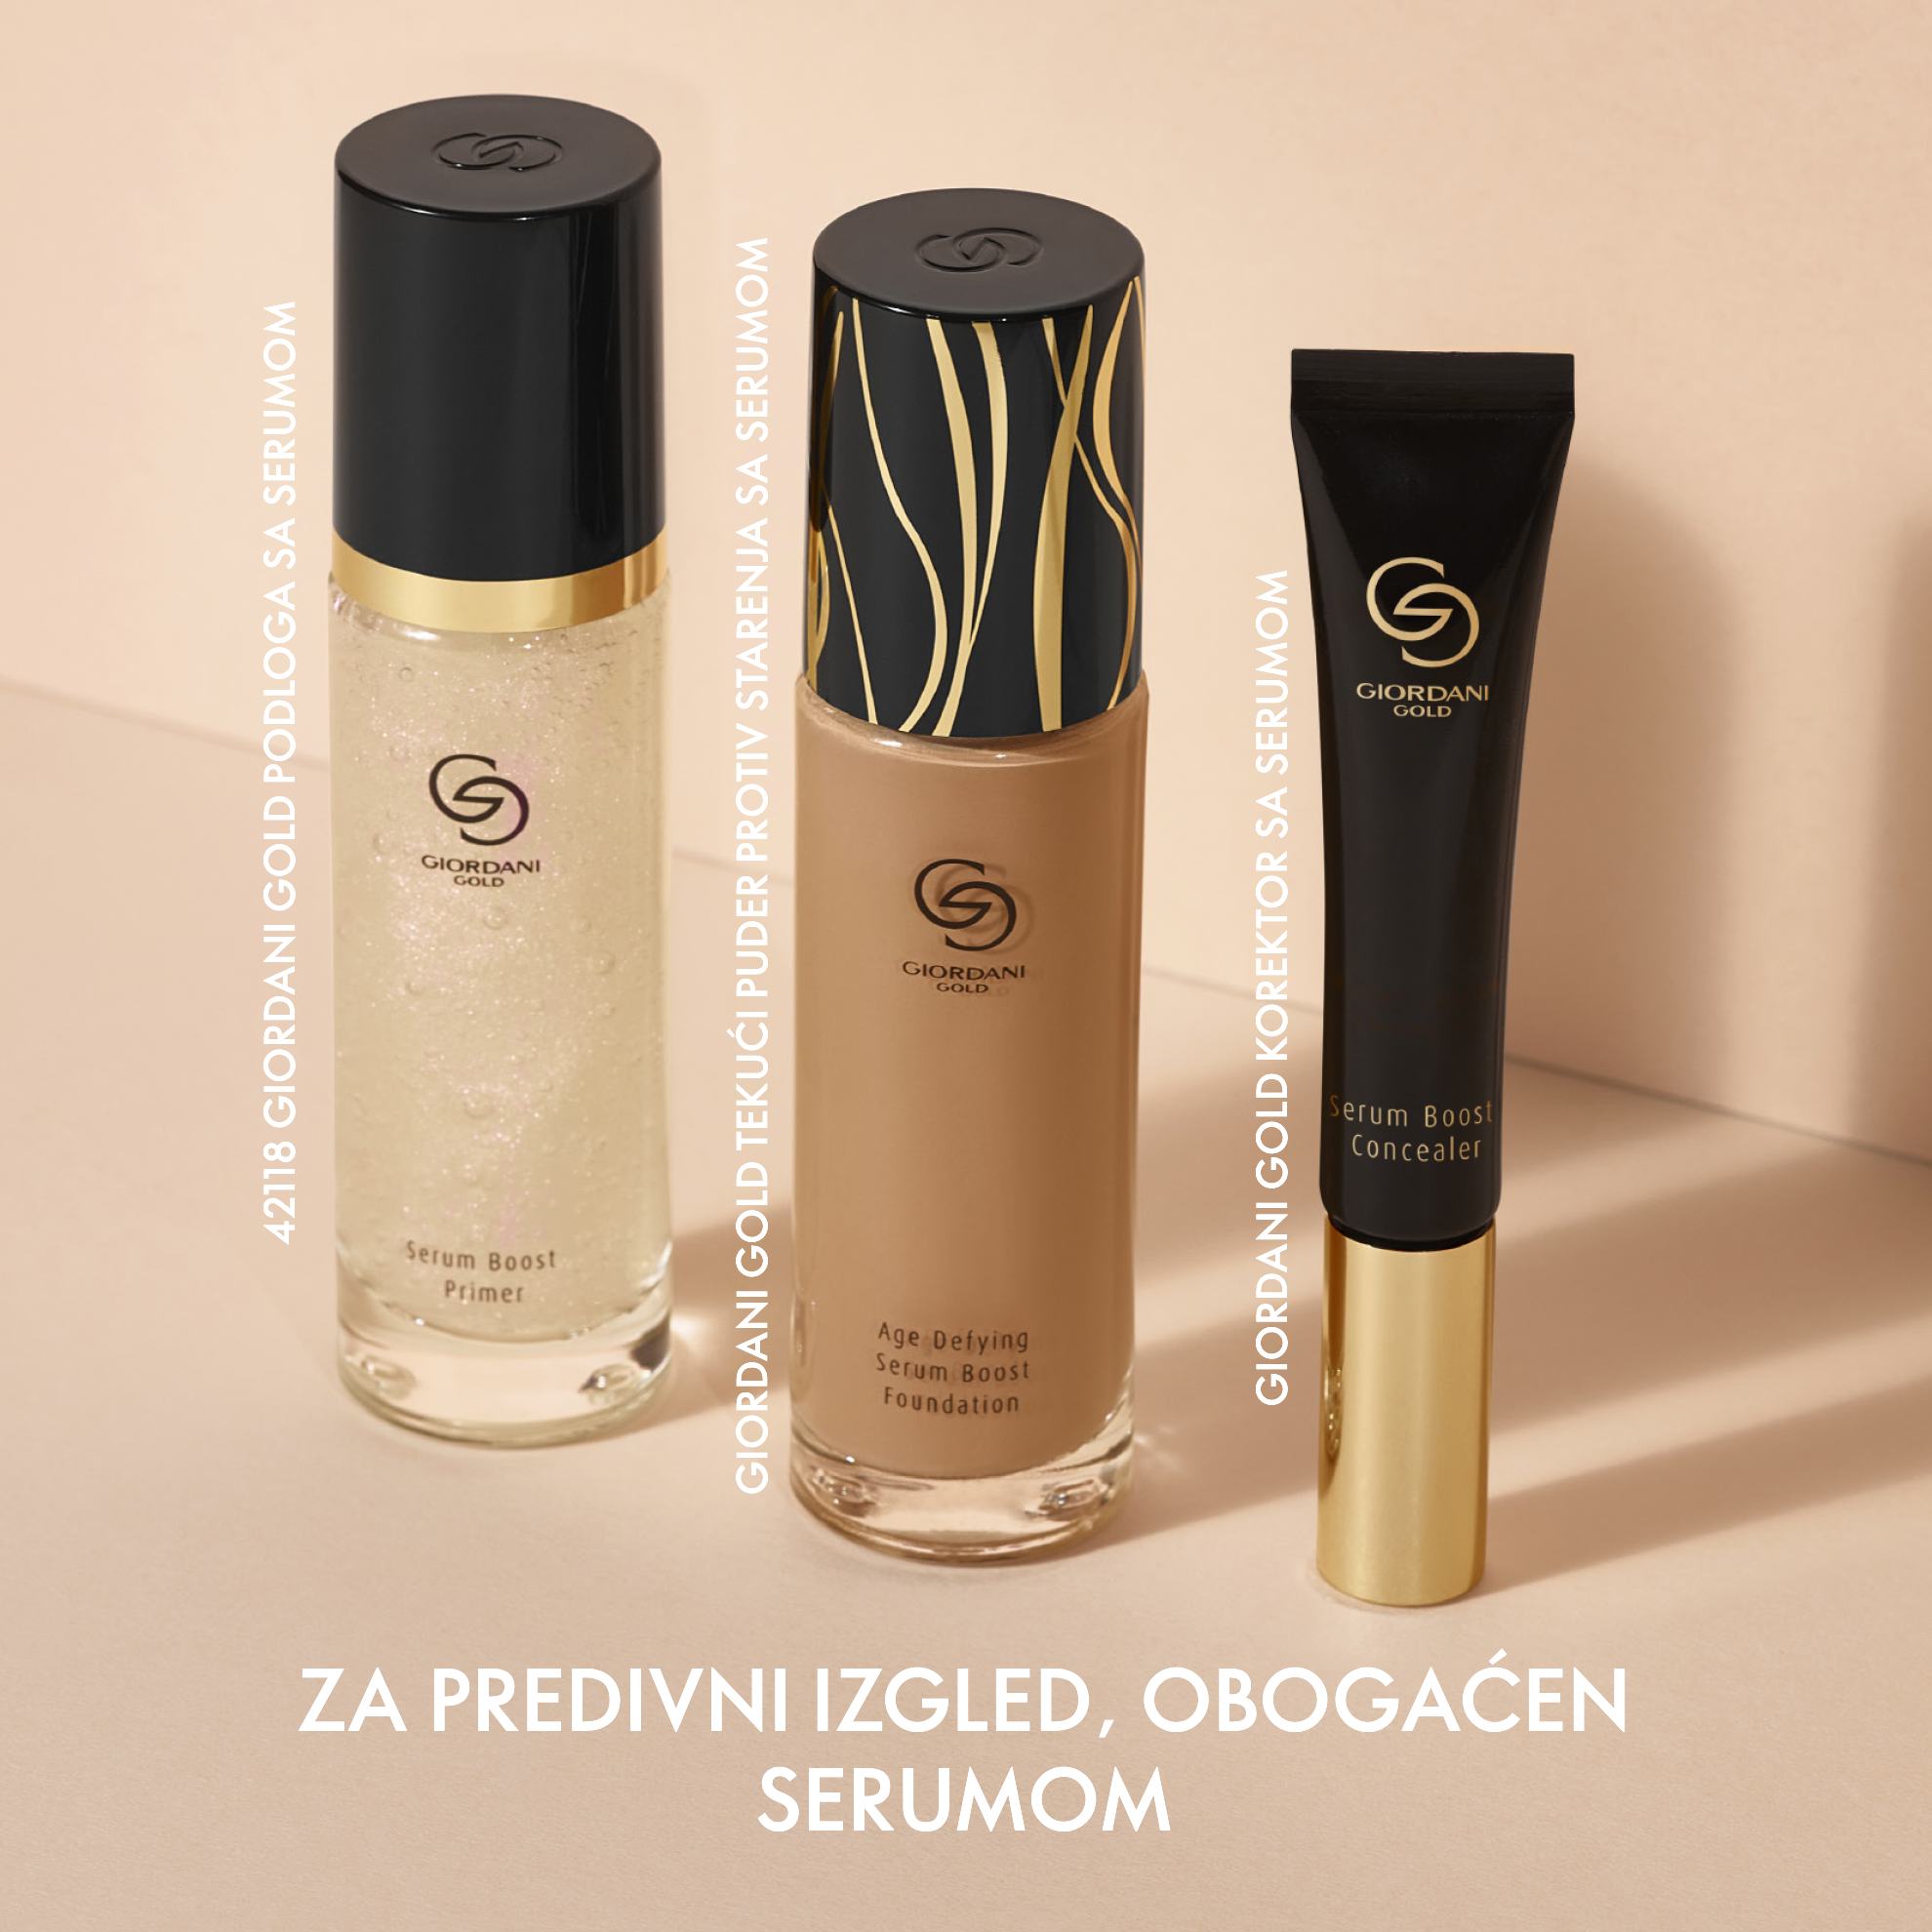 https://media-cdn.oriflame.com/productImage?externalMediaId=product-management-media%2fProducts%2f40951%2fHR%2f40951_7.png&id=16910191&version=1